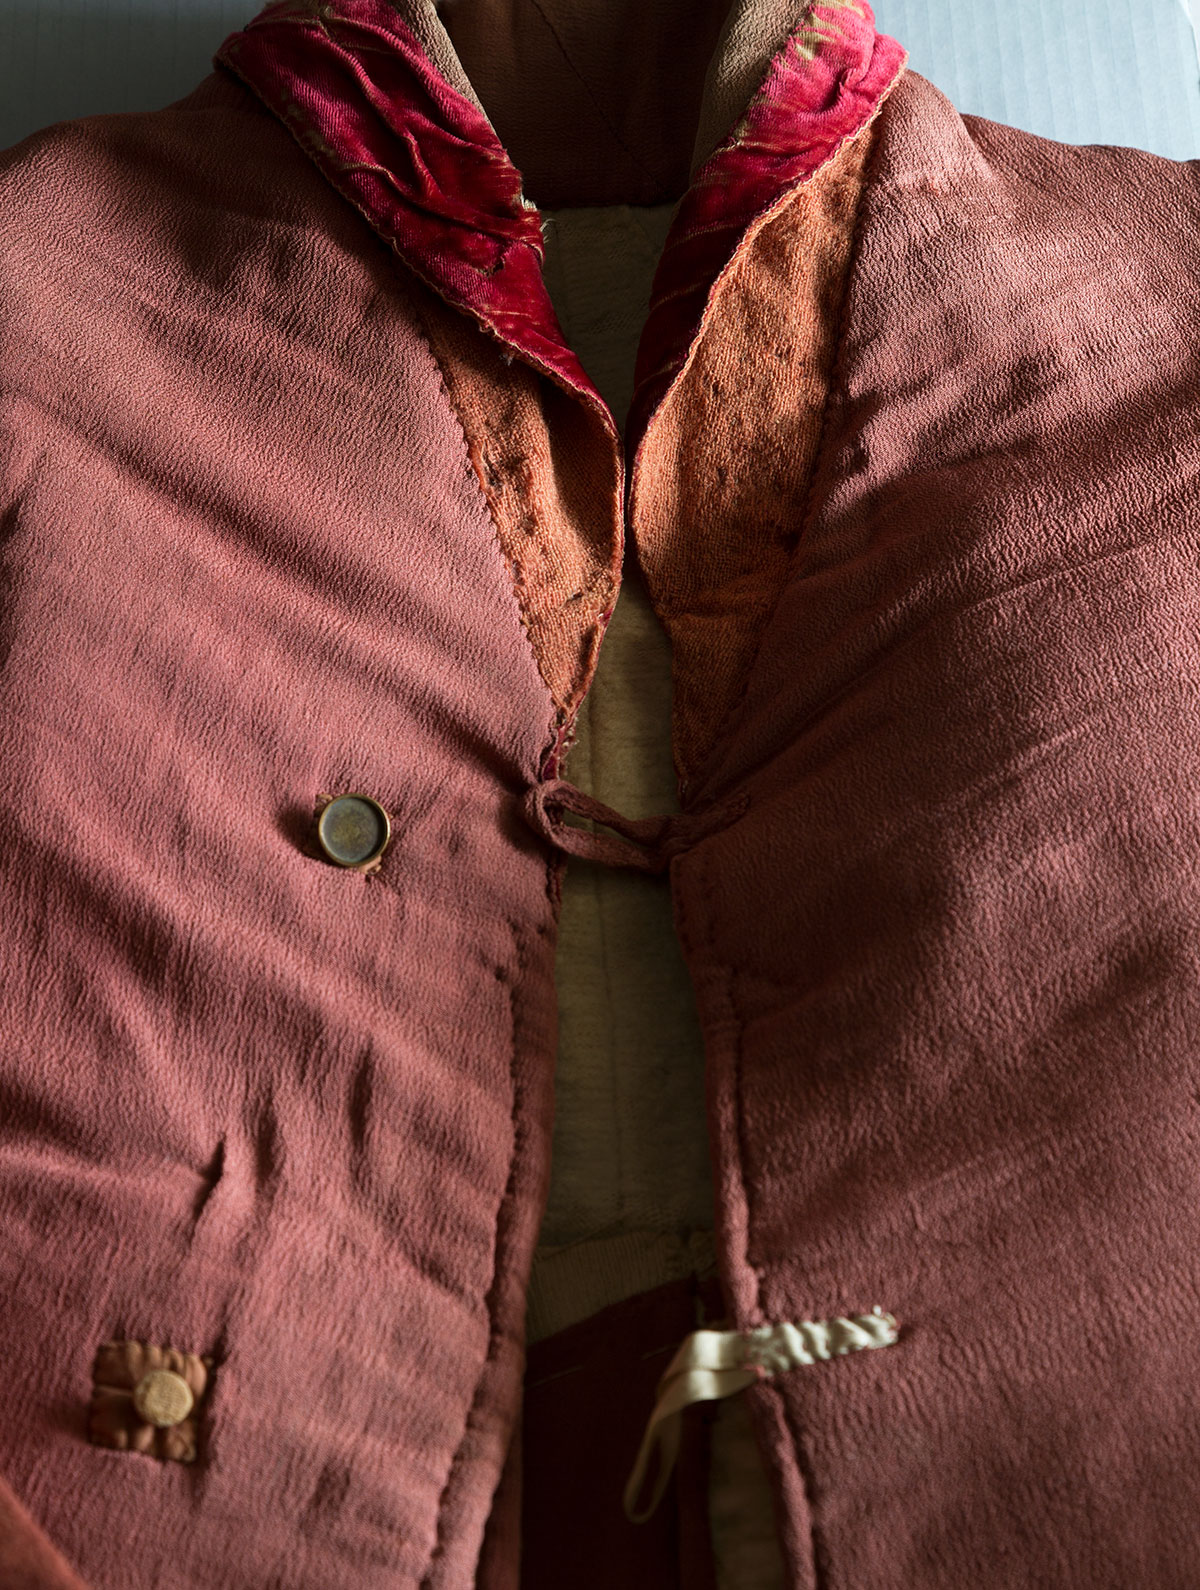 Miguel Flores-Vianna’s photo of Jefferson’s red waistcoat. The coat’s length was shortened during Jefferson’s lifetime, and it is marked with Jefferson’s initials and the year it was made. Courtesy of Cabana.